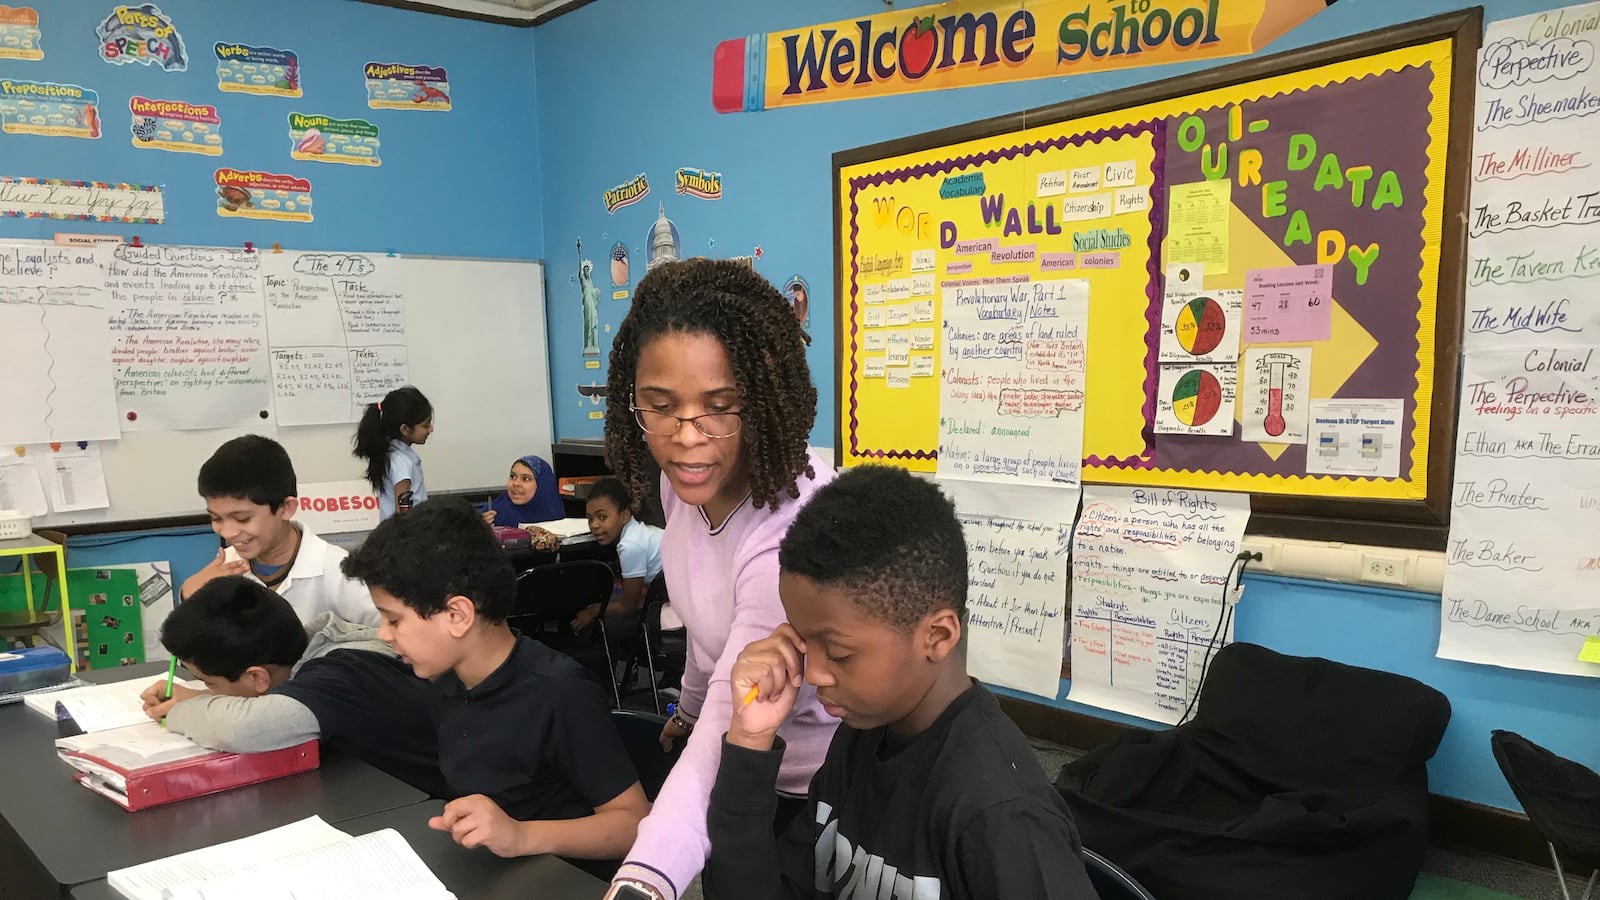 Kenya Posey, who teaches fourth-grade English language arts and social studies, works with students during a recent lesson.